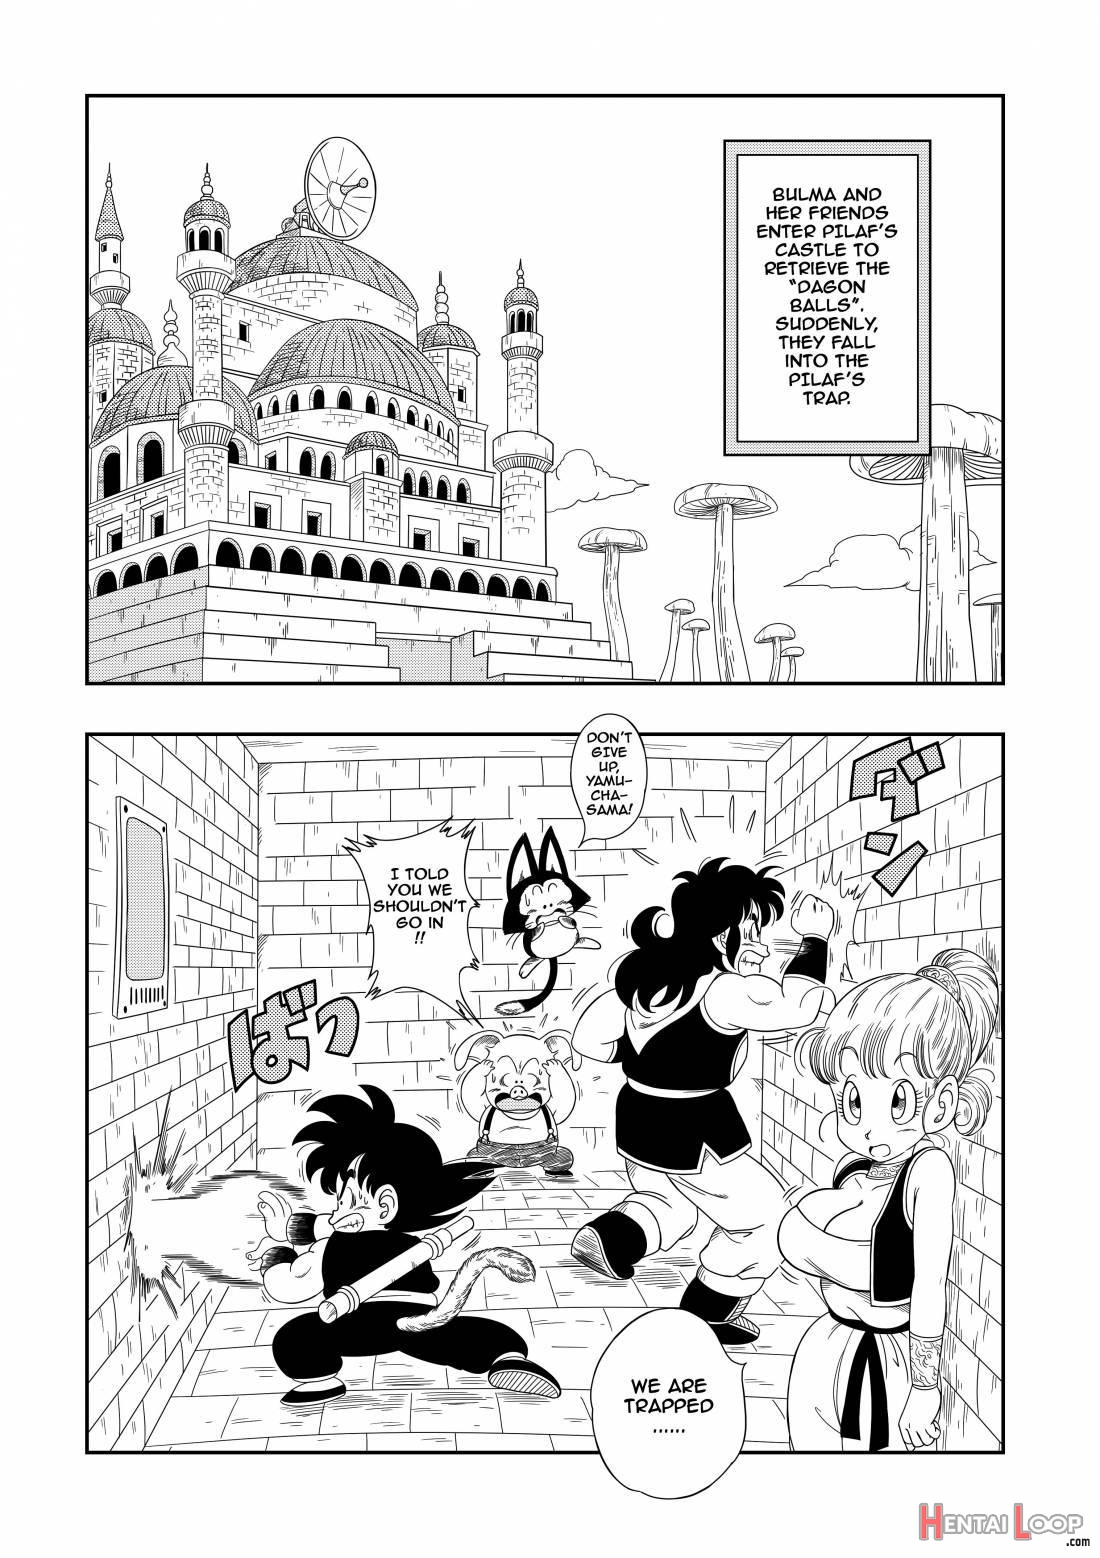 Dagon Ball - Punishment In Pilaf's Castle page 2